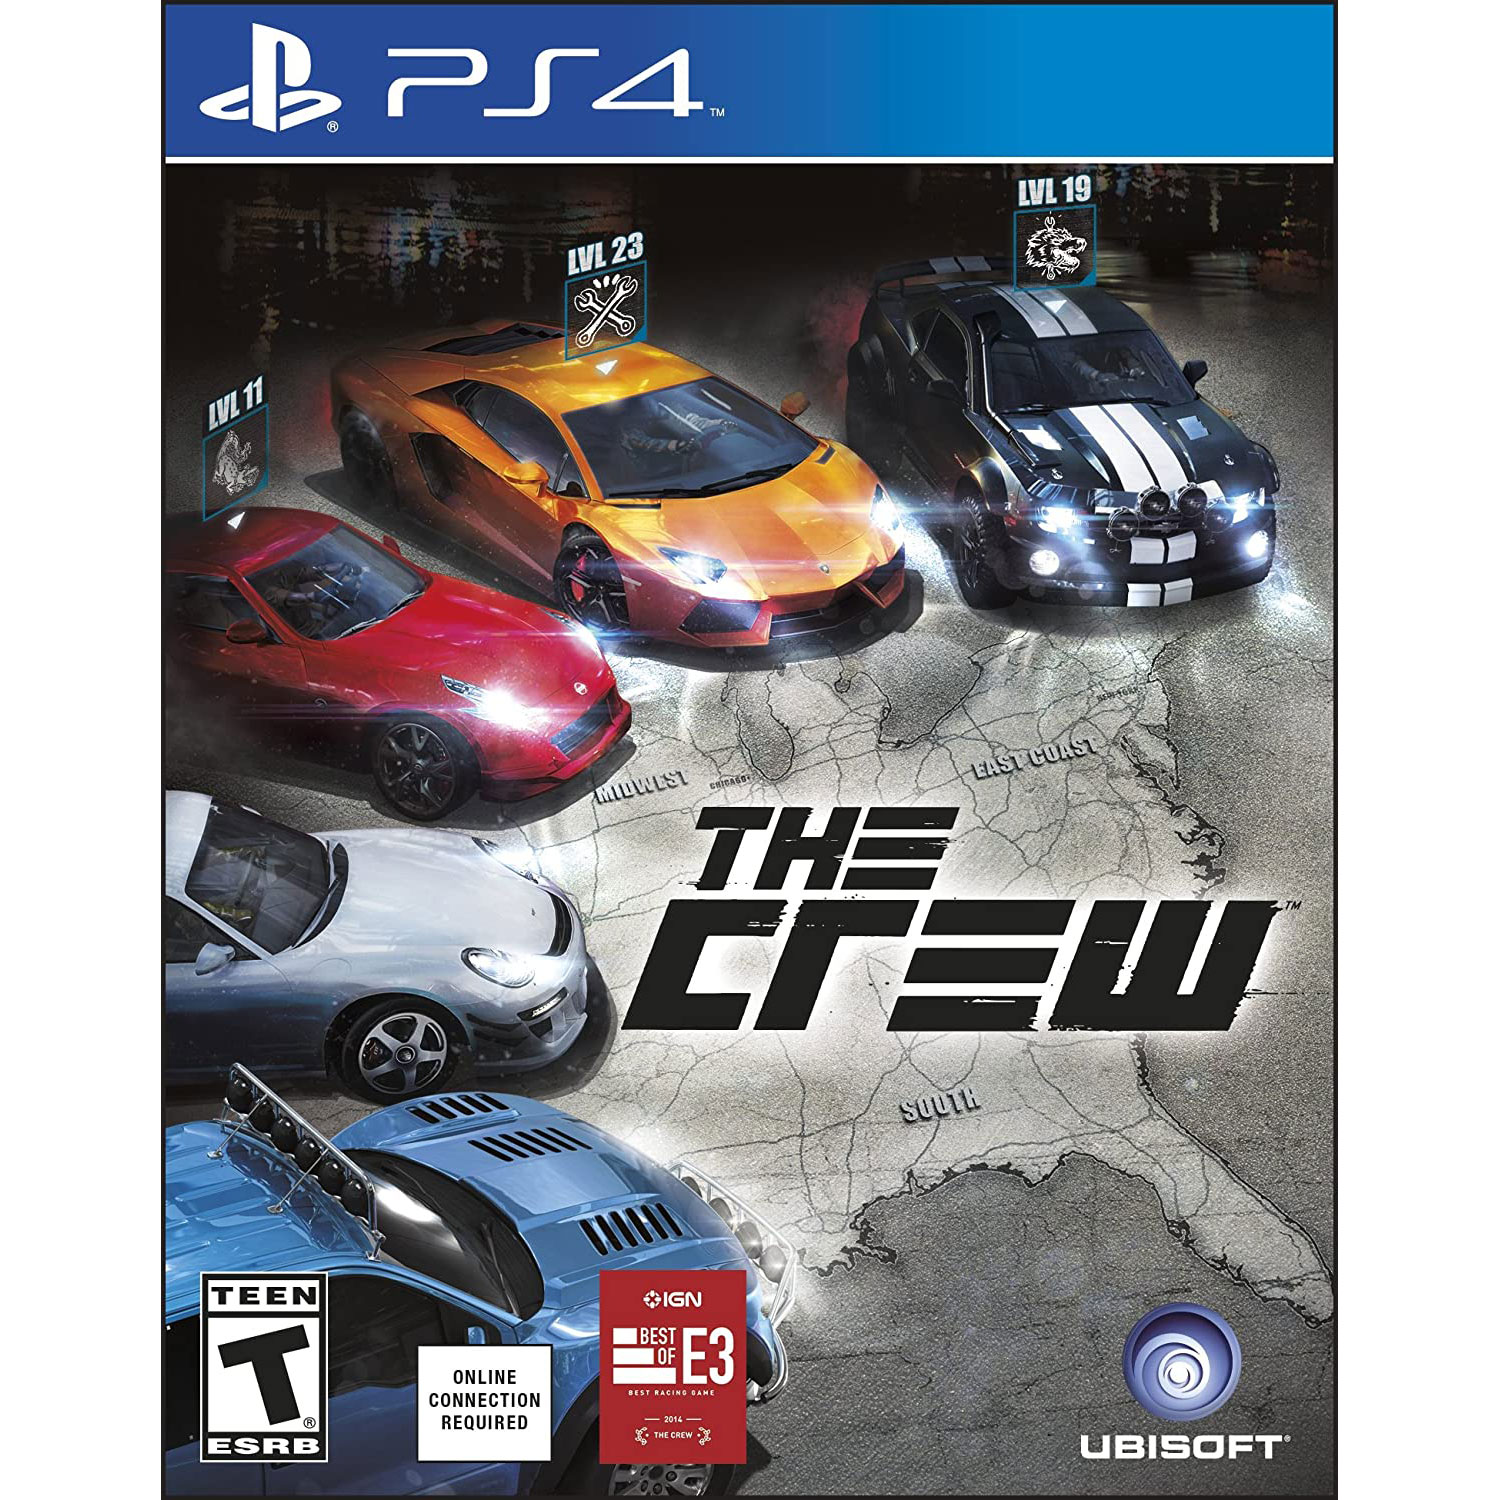 anders schors Lieve The Crew PlayStation 4 PS4 Game For Sale | DKOldies